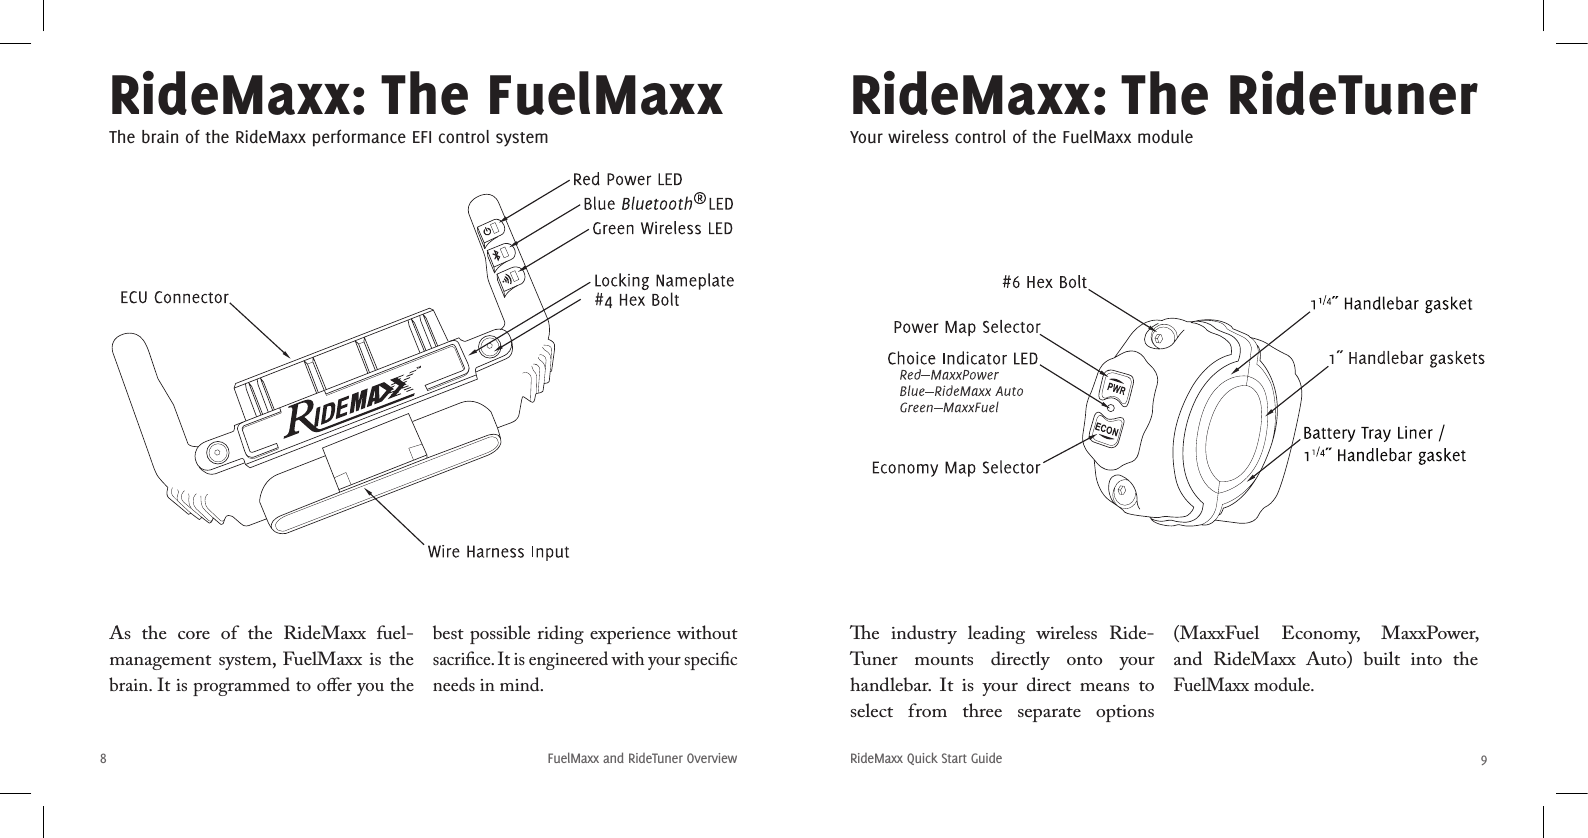 8RideMaxx Quick Start Guide 9FuelMaxx and RideTuner OverviewRideMaxx: The FuelMaxxThe brain of the RideMaxx performance EFI control systemRideMaxx: The RideTunerYour wireless control of the FuelMaxx modulee  industry  leading  wireless  Ride-Tuner  mounts  directly  onto  your handlebar.  It  is  your  direct  means  to select  from  three  separate  options (MaxxFuel  Economy,  MaxxPower, and  RideMaxx  Auto)  built  into  the  FuelMaxx module.As  the  core  of  the  RideMaxx  fuel-management system, FuelMaxx is  the brain. It is programmed to oﬀer you the best possible riding experience without sacriﬁce. It is engineered with your speciﬁc needs in mind.